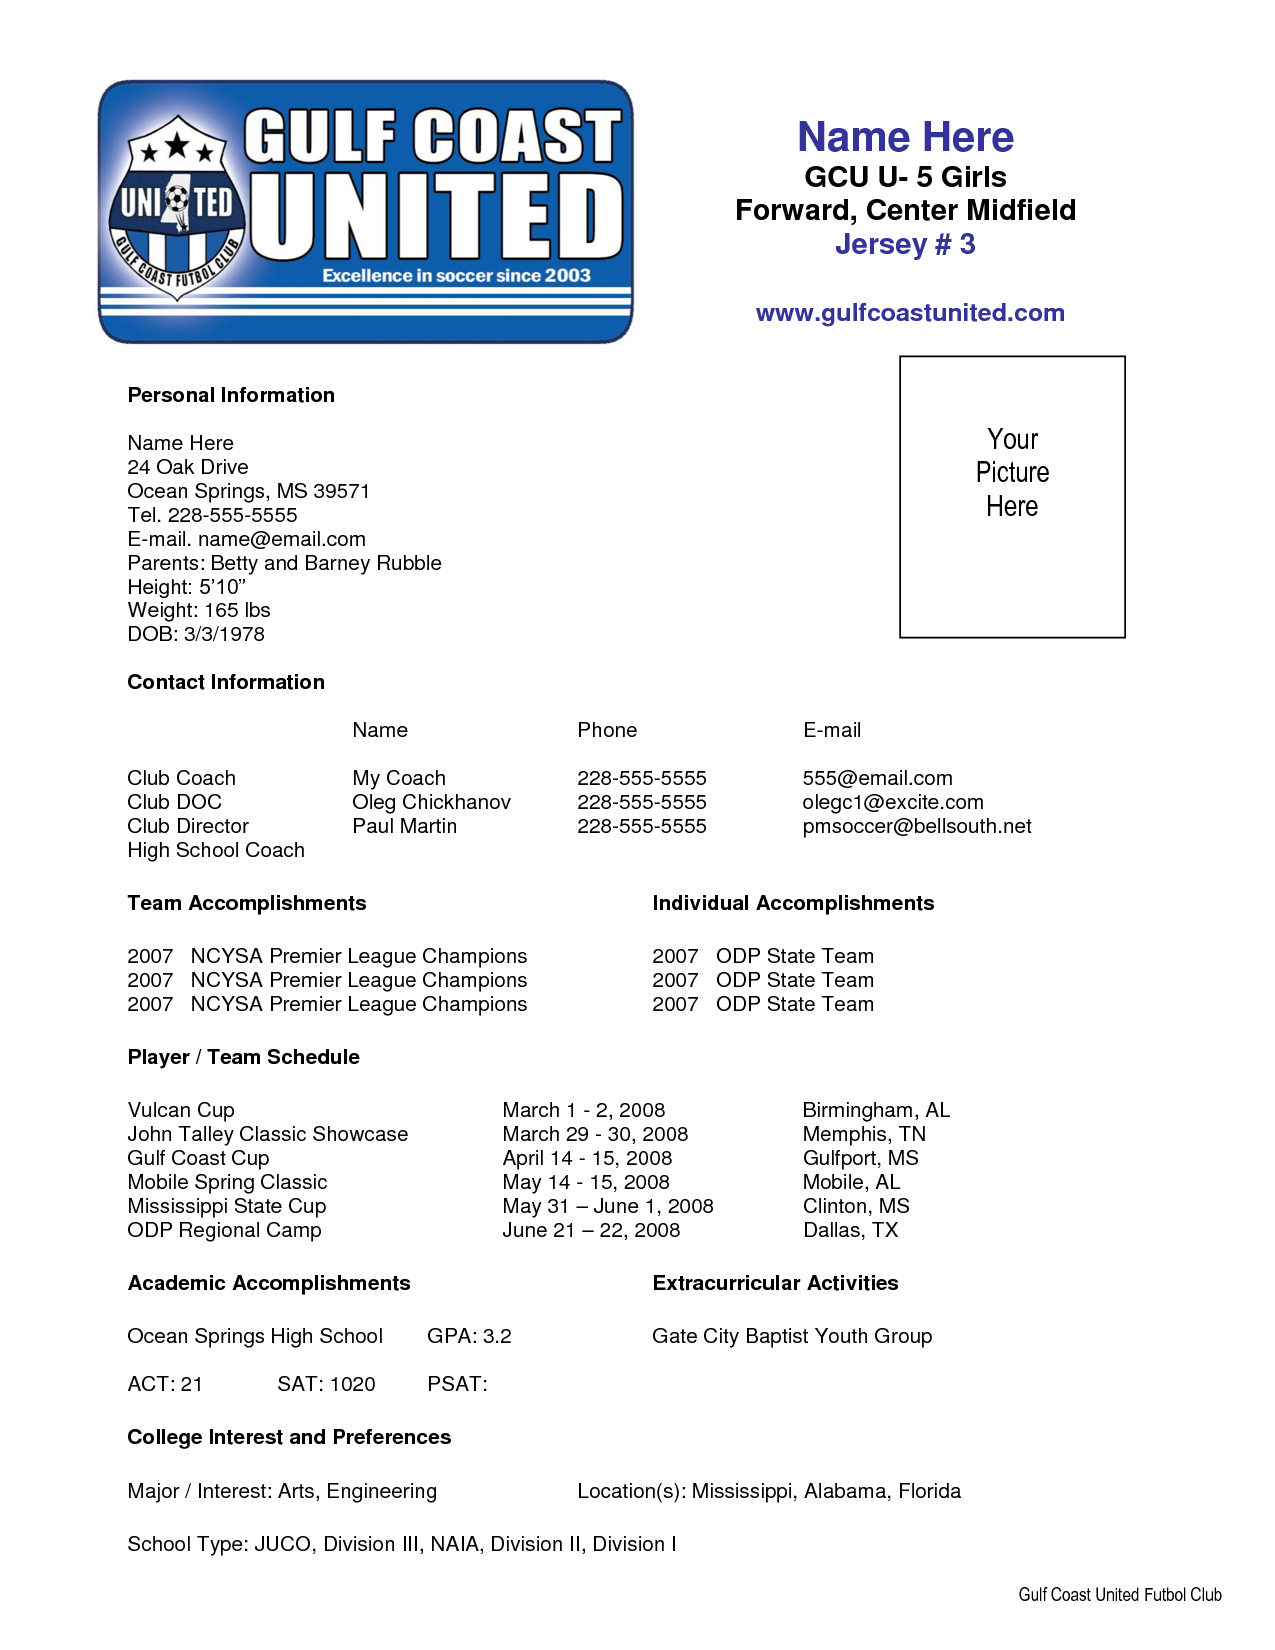 Sample Soccer Resume Coaching Business Best Resume Template inside sizing 1275 X 1650